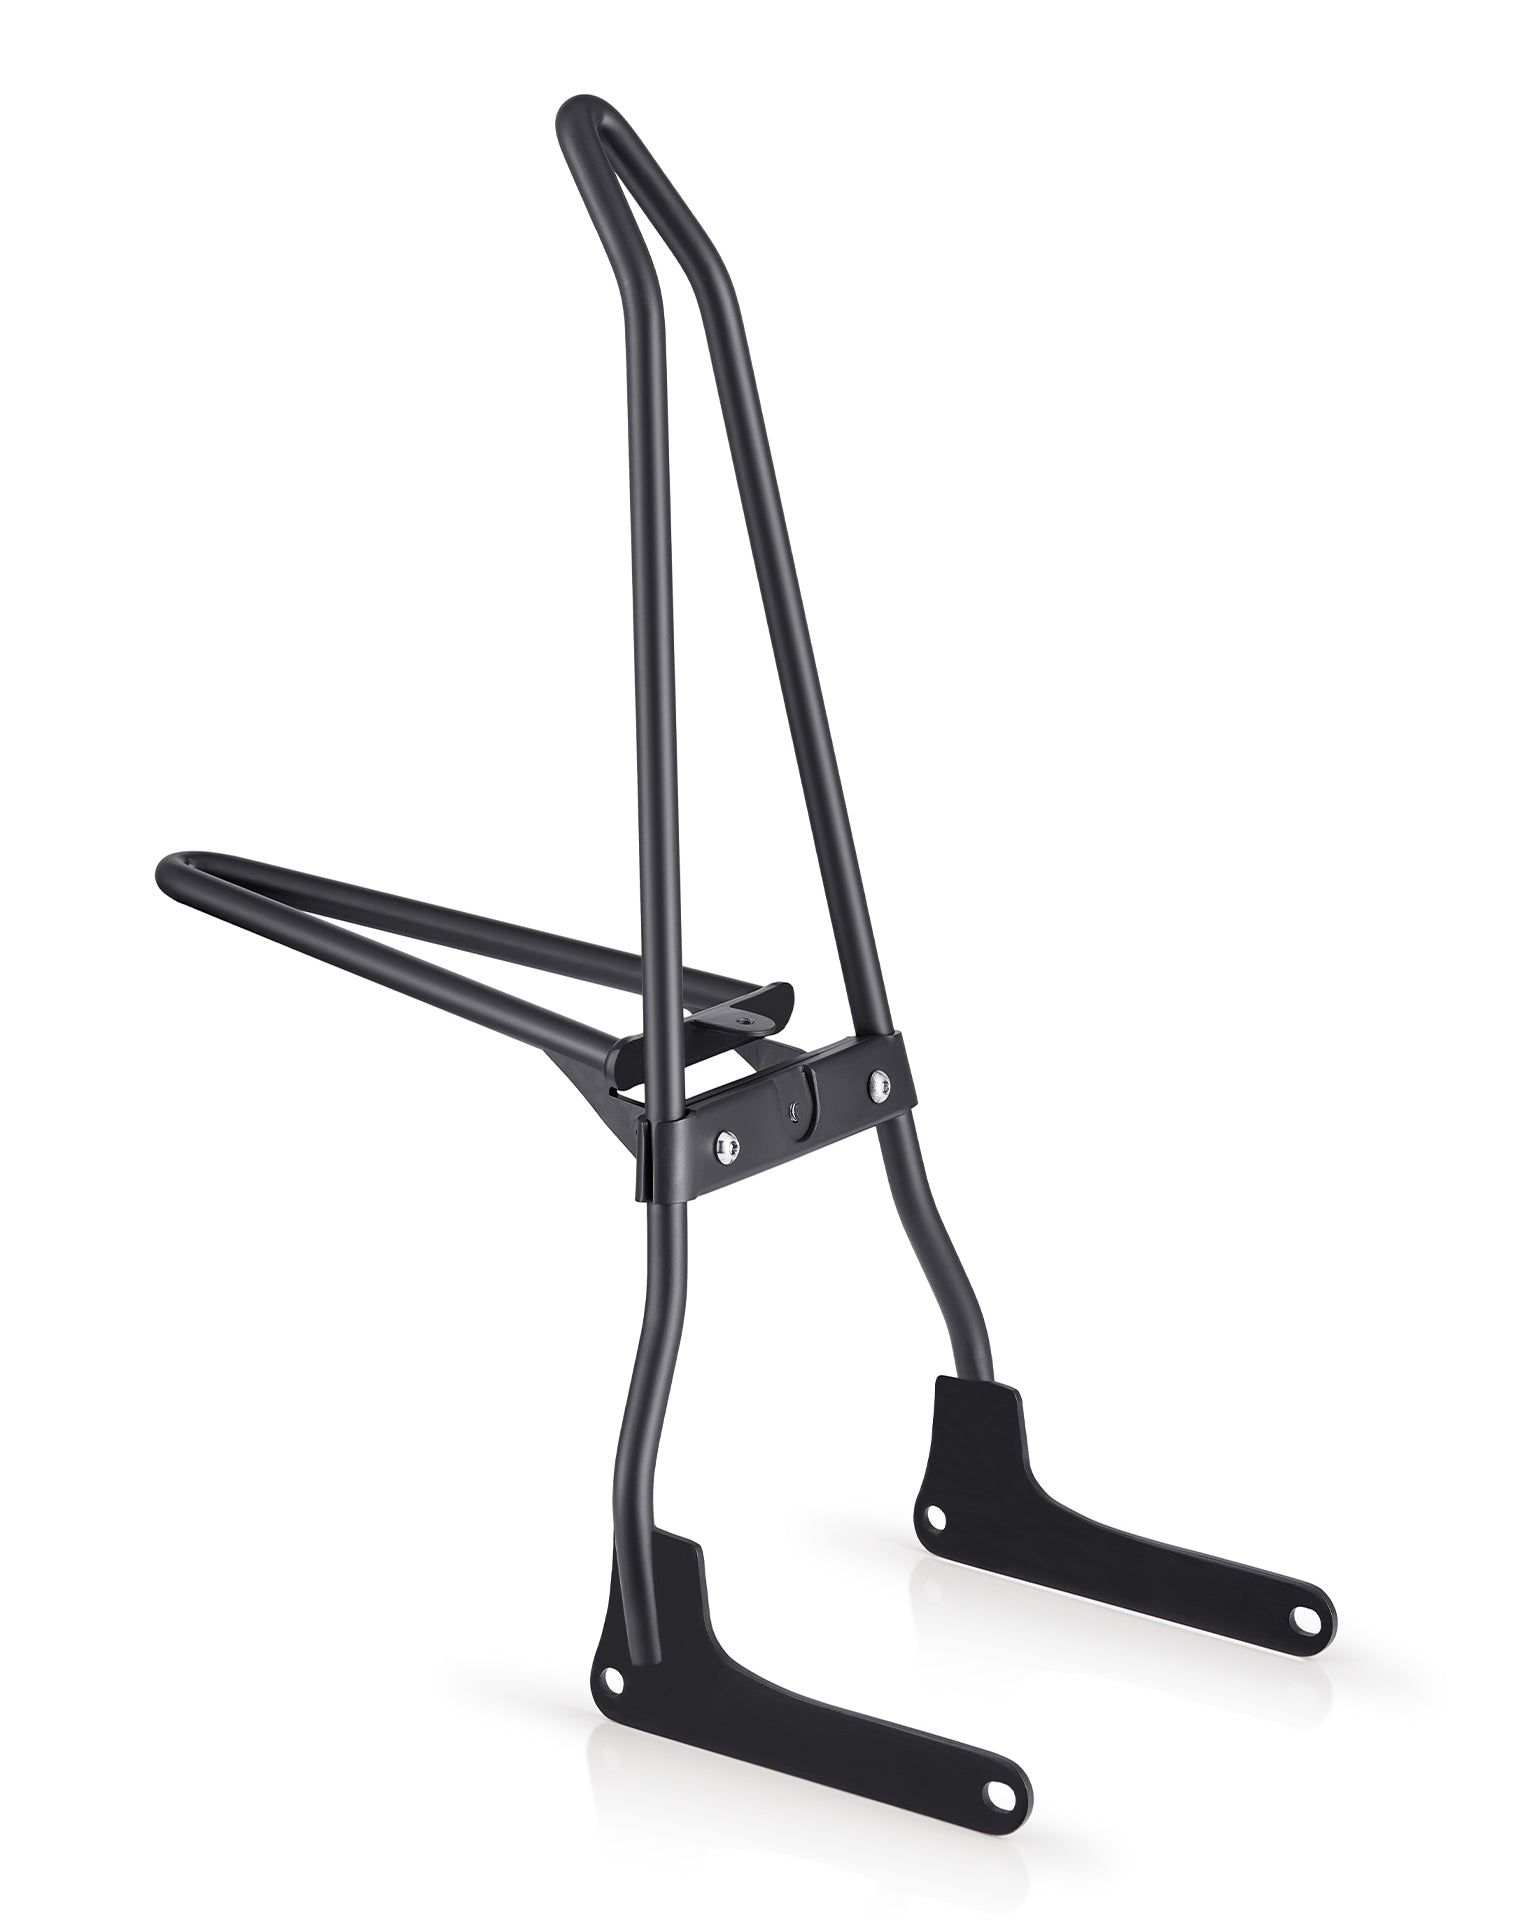 Image of Iron Born Blade 25" Sissy Bar with Foldable Luggage Rack for Harley Softail Low Rider S FXLRS Matte Black